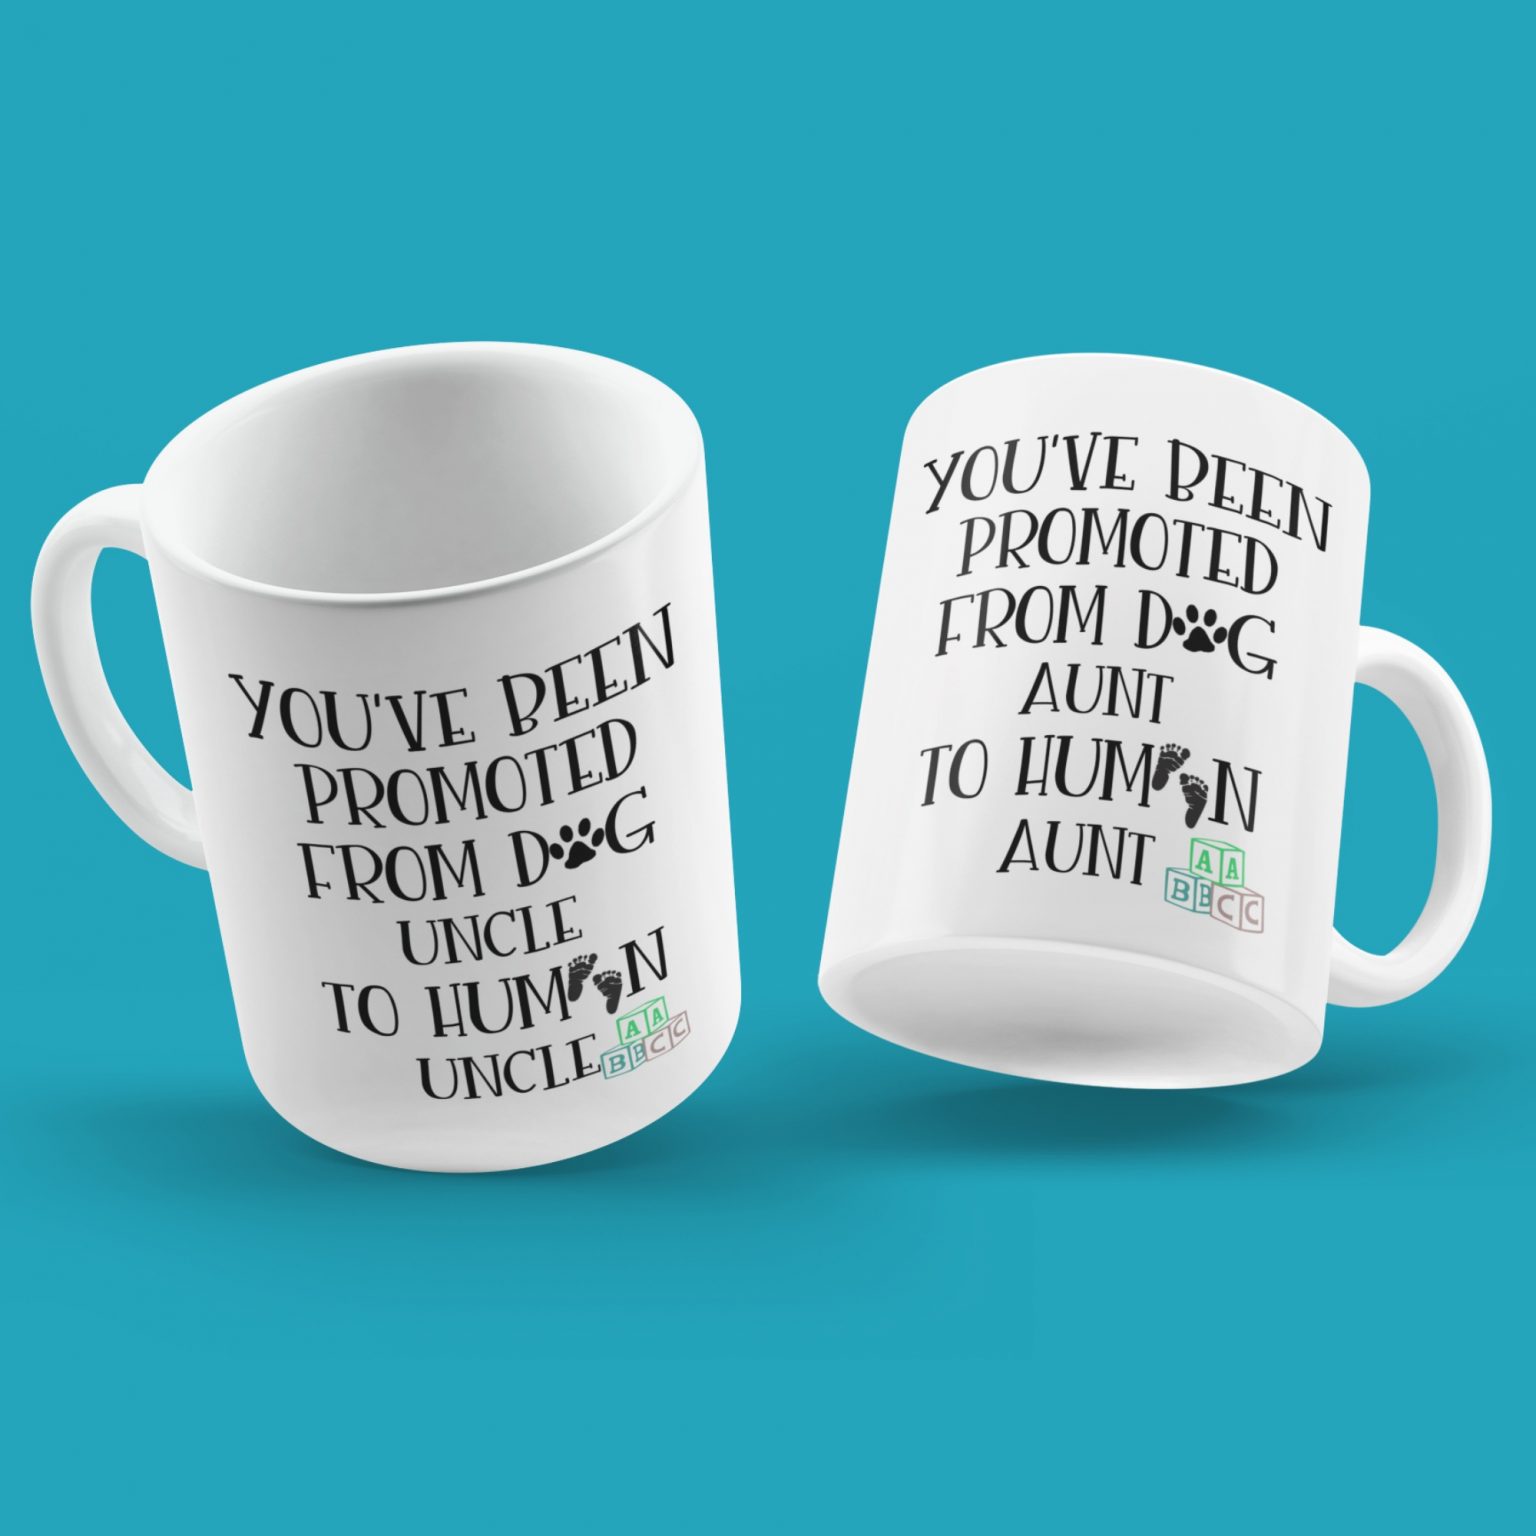 New Aunt and New Uncle Mug Set Pregnancy Announcement